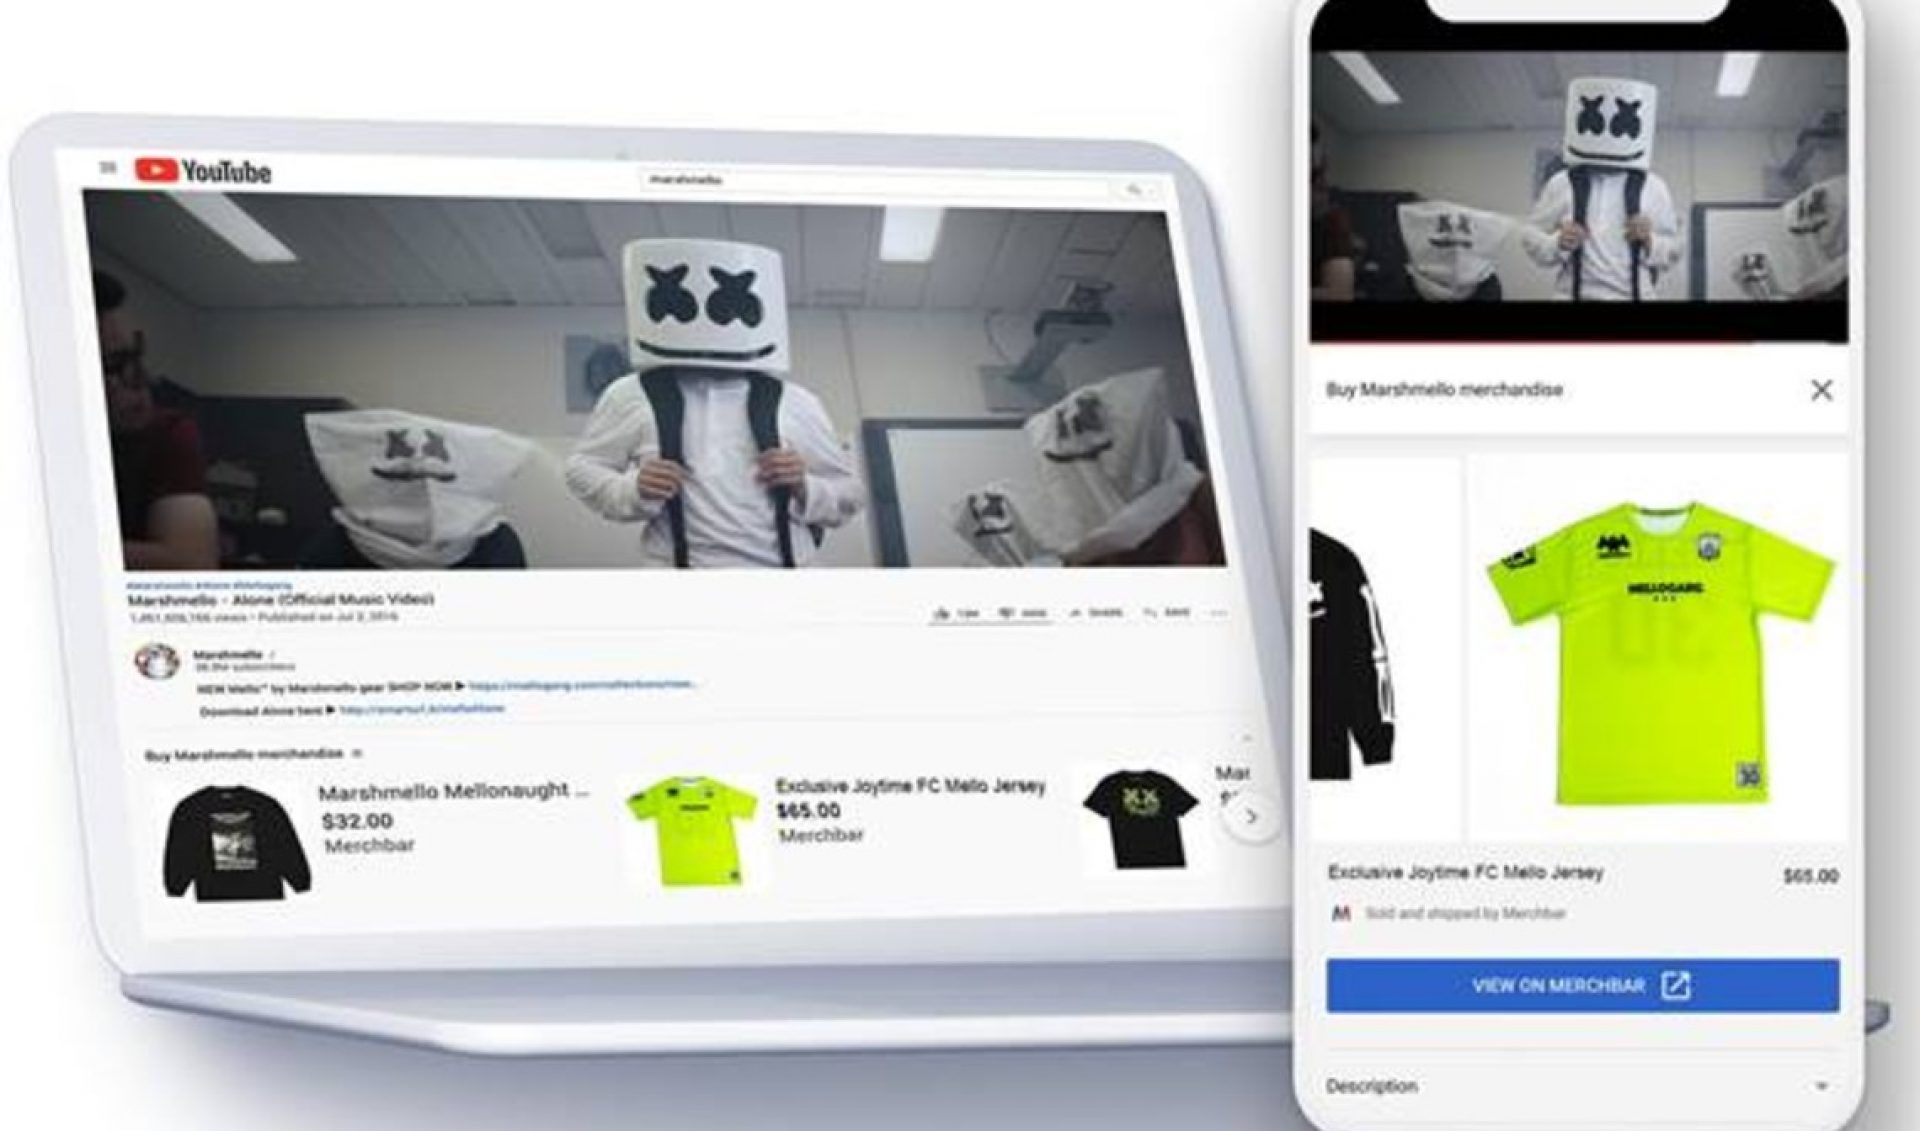 YouTube Pacts With MerchBar To Help ‘Official Artist Channels’ Drive Merch, Vinyl Sales